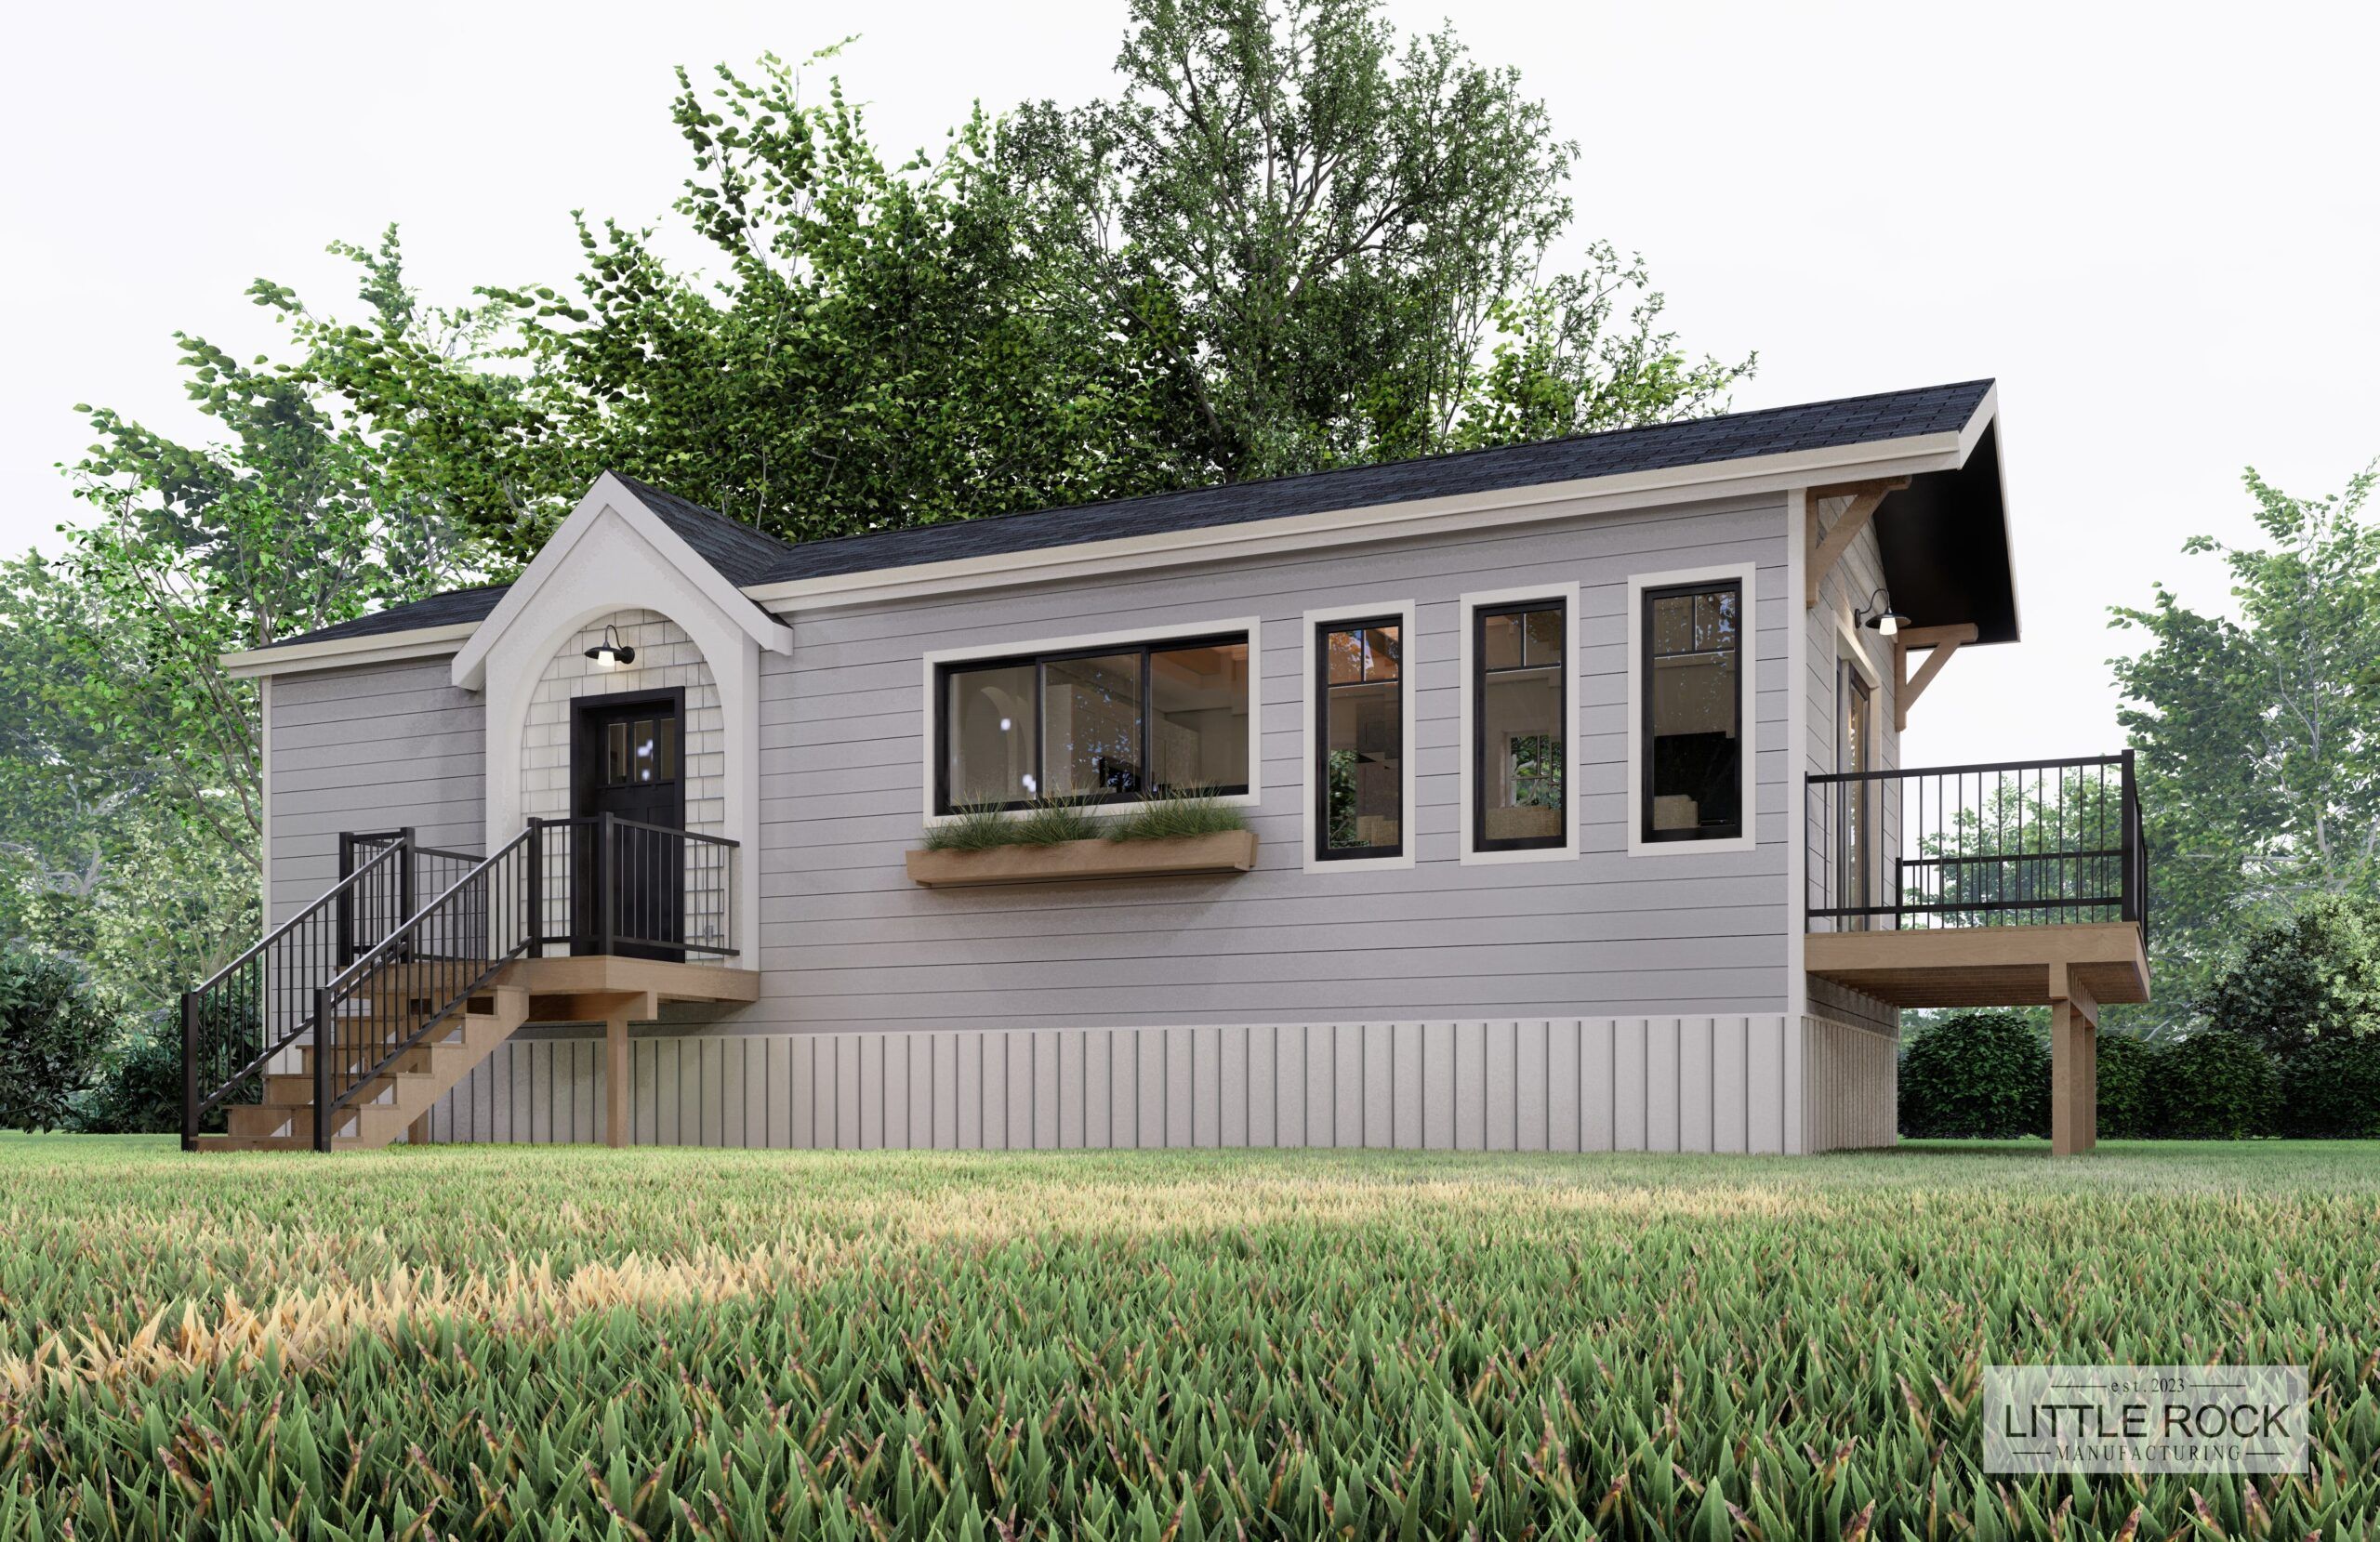 The Brighton is a 1 bedroom, 1 bathroom residence built by Little Rock Manufacturing